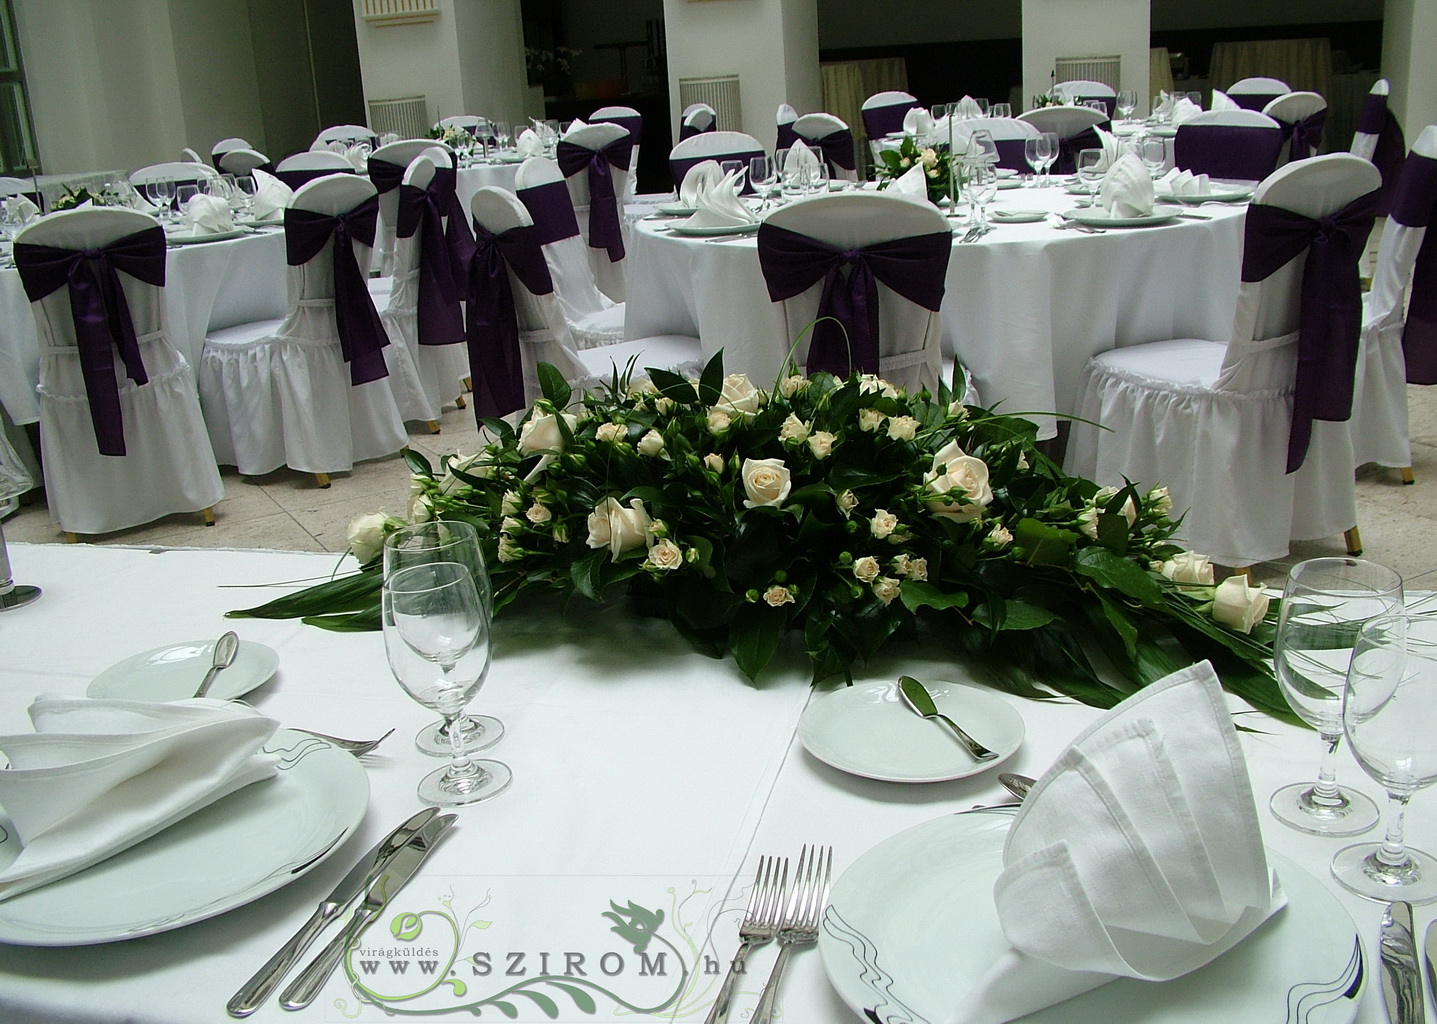 flower delivery Budapest - Main table centerpiece (cream roses, spray roses), Gerbeaud Budapest, wedding